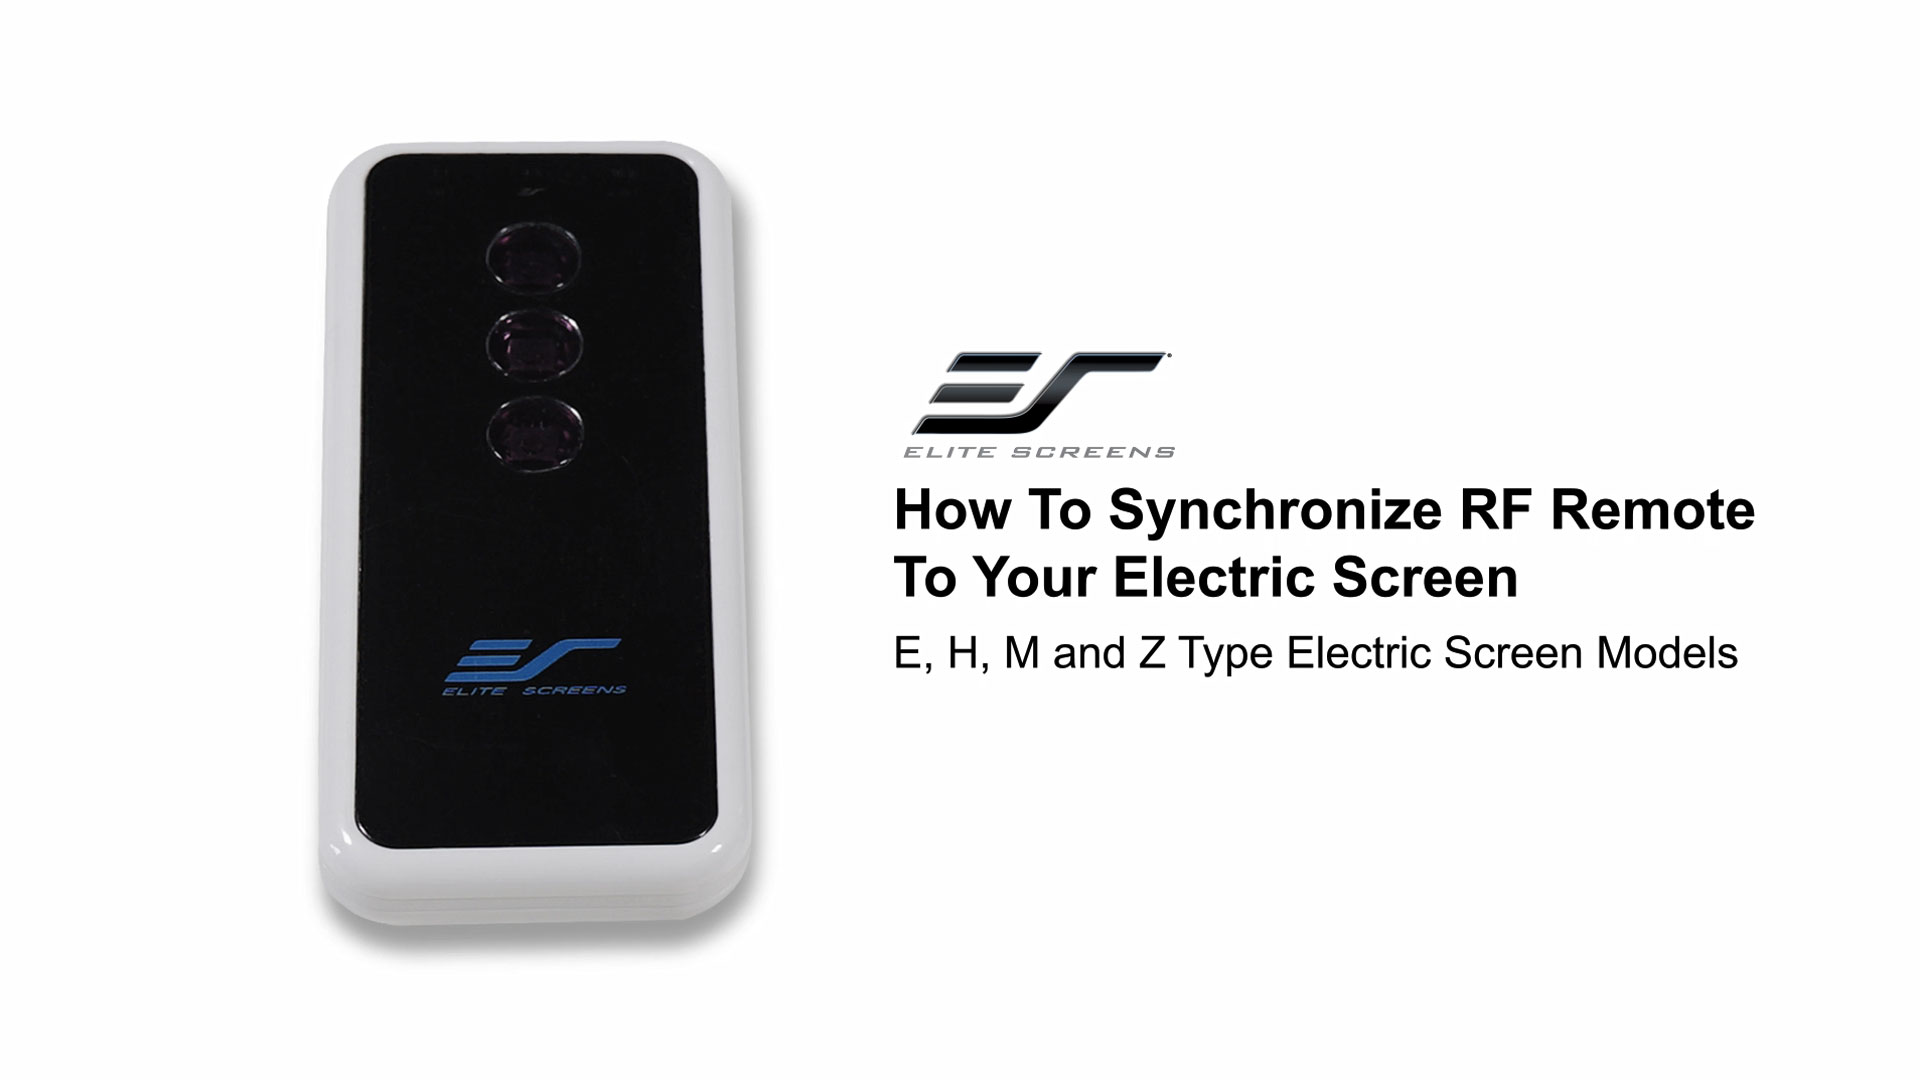 How to Synchronize RF Remote to Your Electric Screen